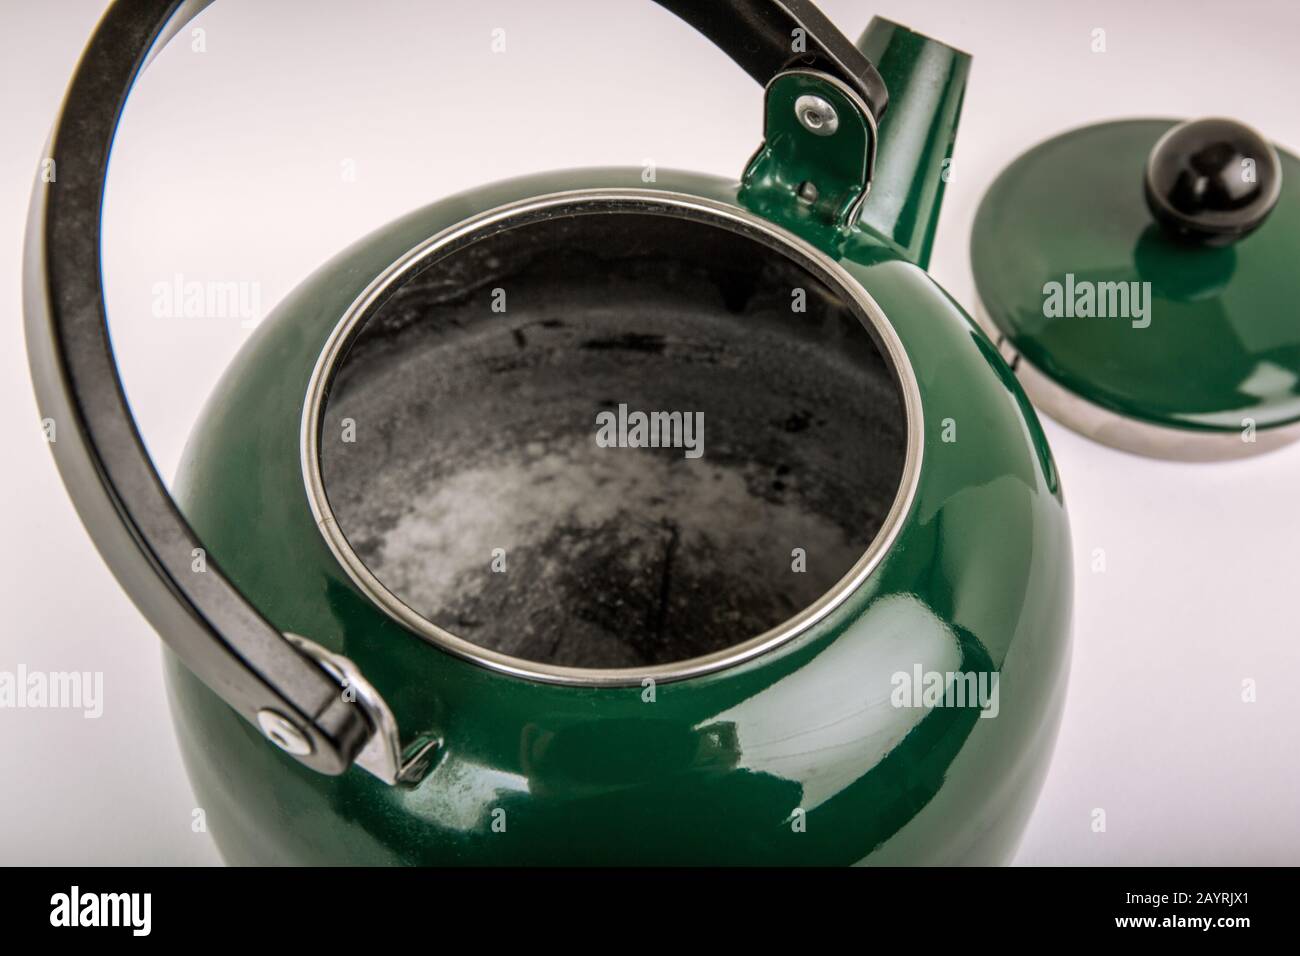 One of the signs of a well-used tea kettle can be a layer of hard water buildup. Stock Photo